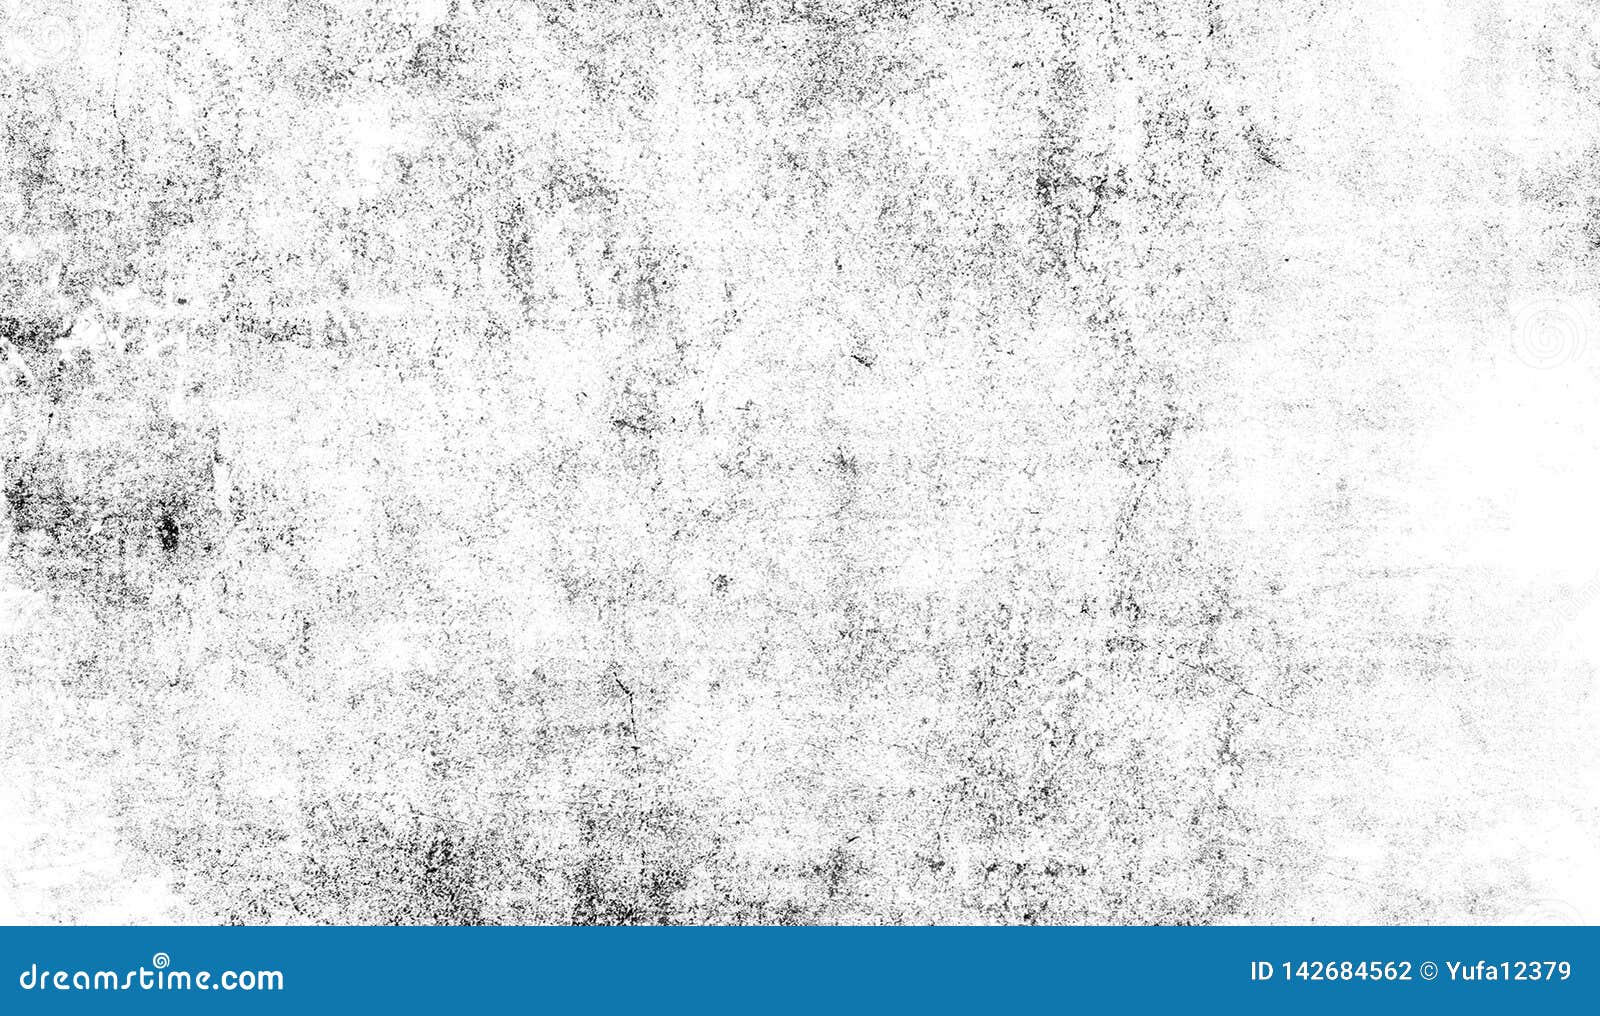 grunge white scratch pattern. monochrome particles abstract texture. black printing  overlays